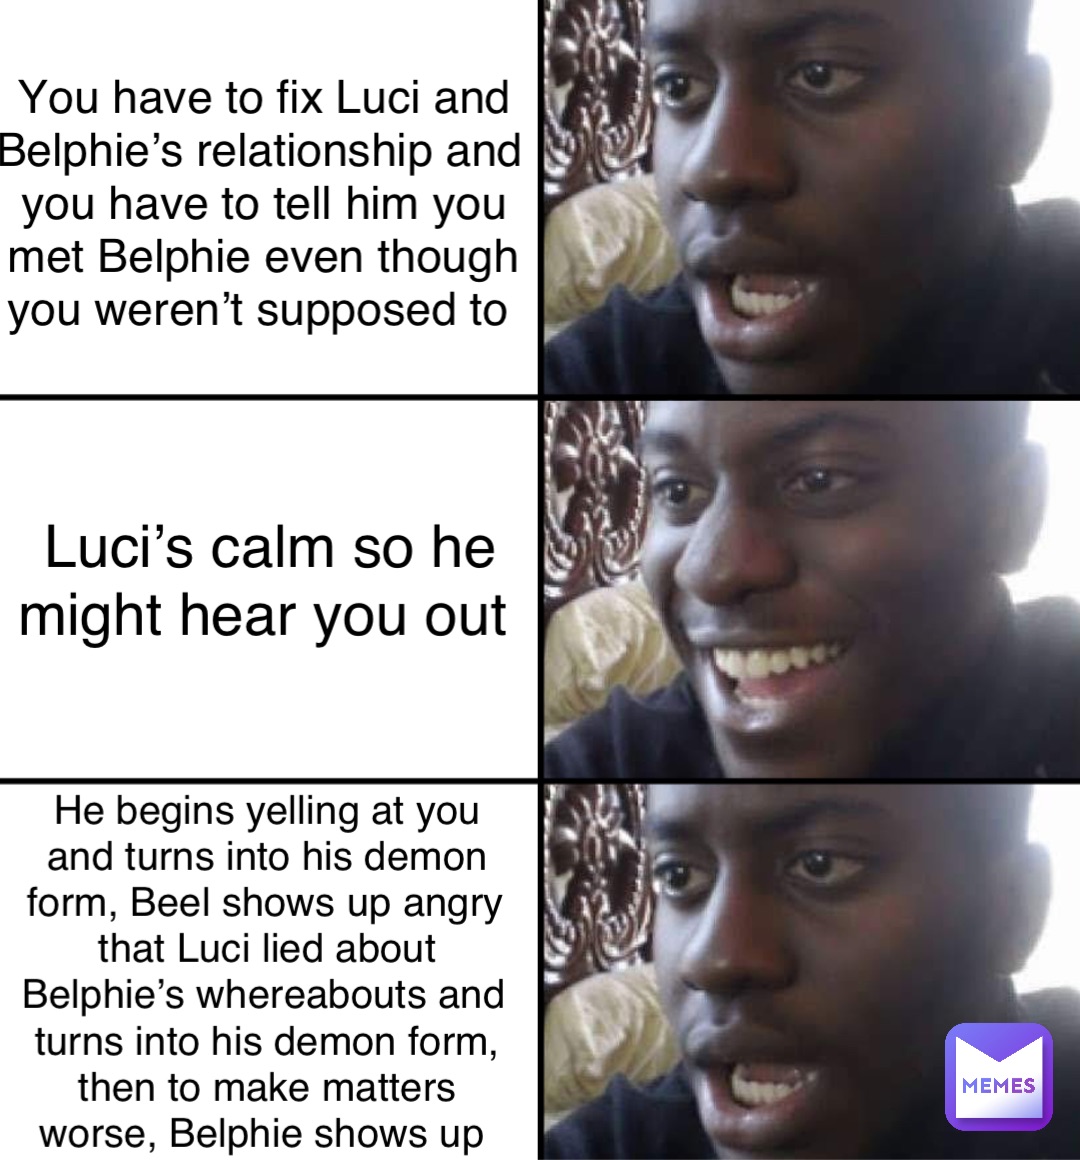 You have to fix Luci and Belphie’s relationship and you have to tell him you met Belphie even though you weren’t supposed to Luci’s calm so he might hear you out He begins yelling at you and turns into his demon form, Beel shows up angry that Luci lied about Belphie’s whereabouts and turns into his demon form, then to make matters worse, Belphie shows up